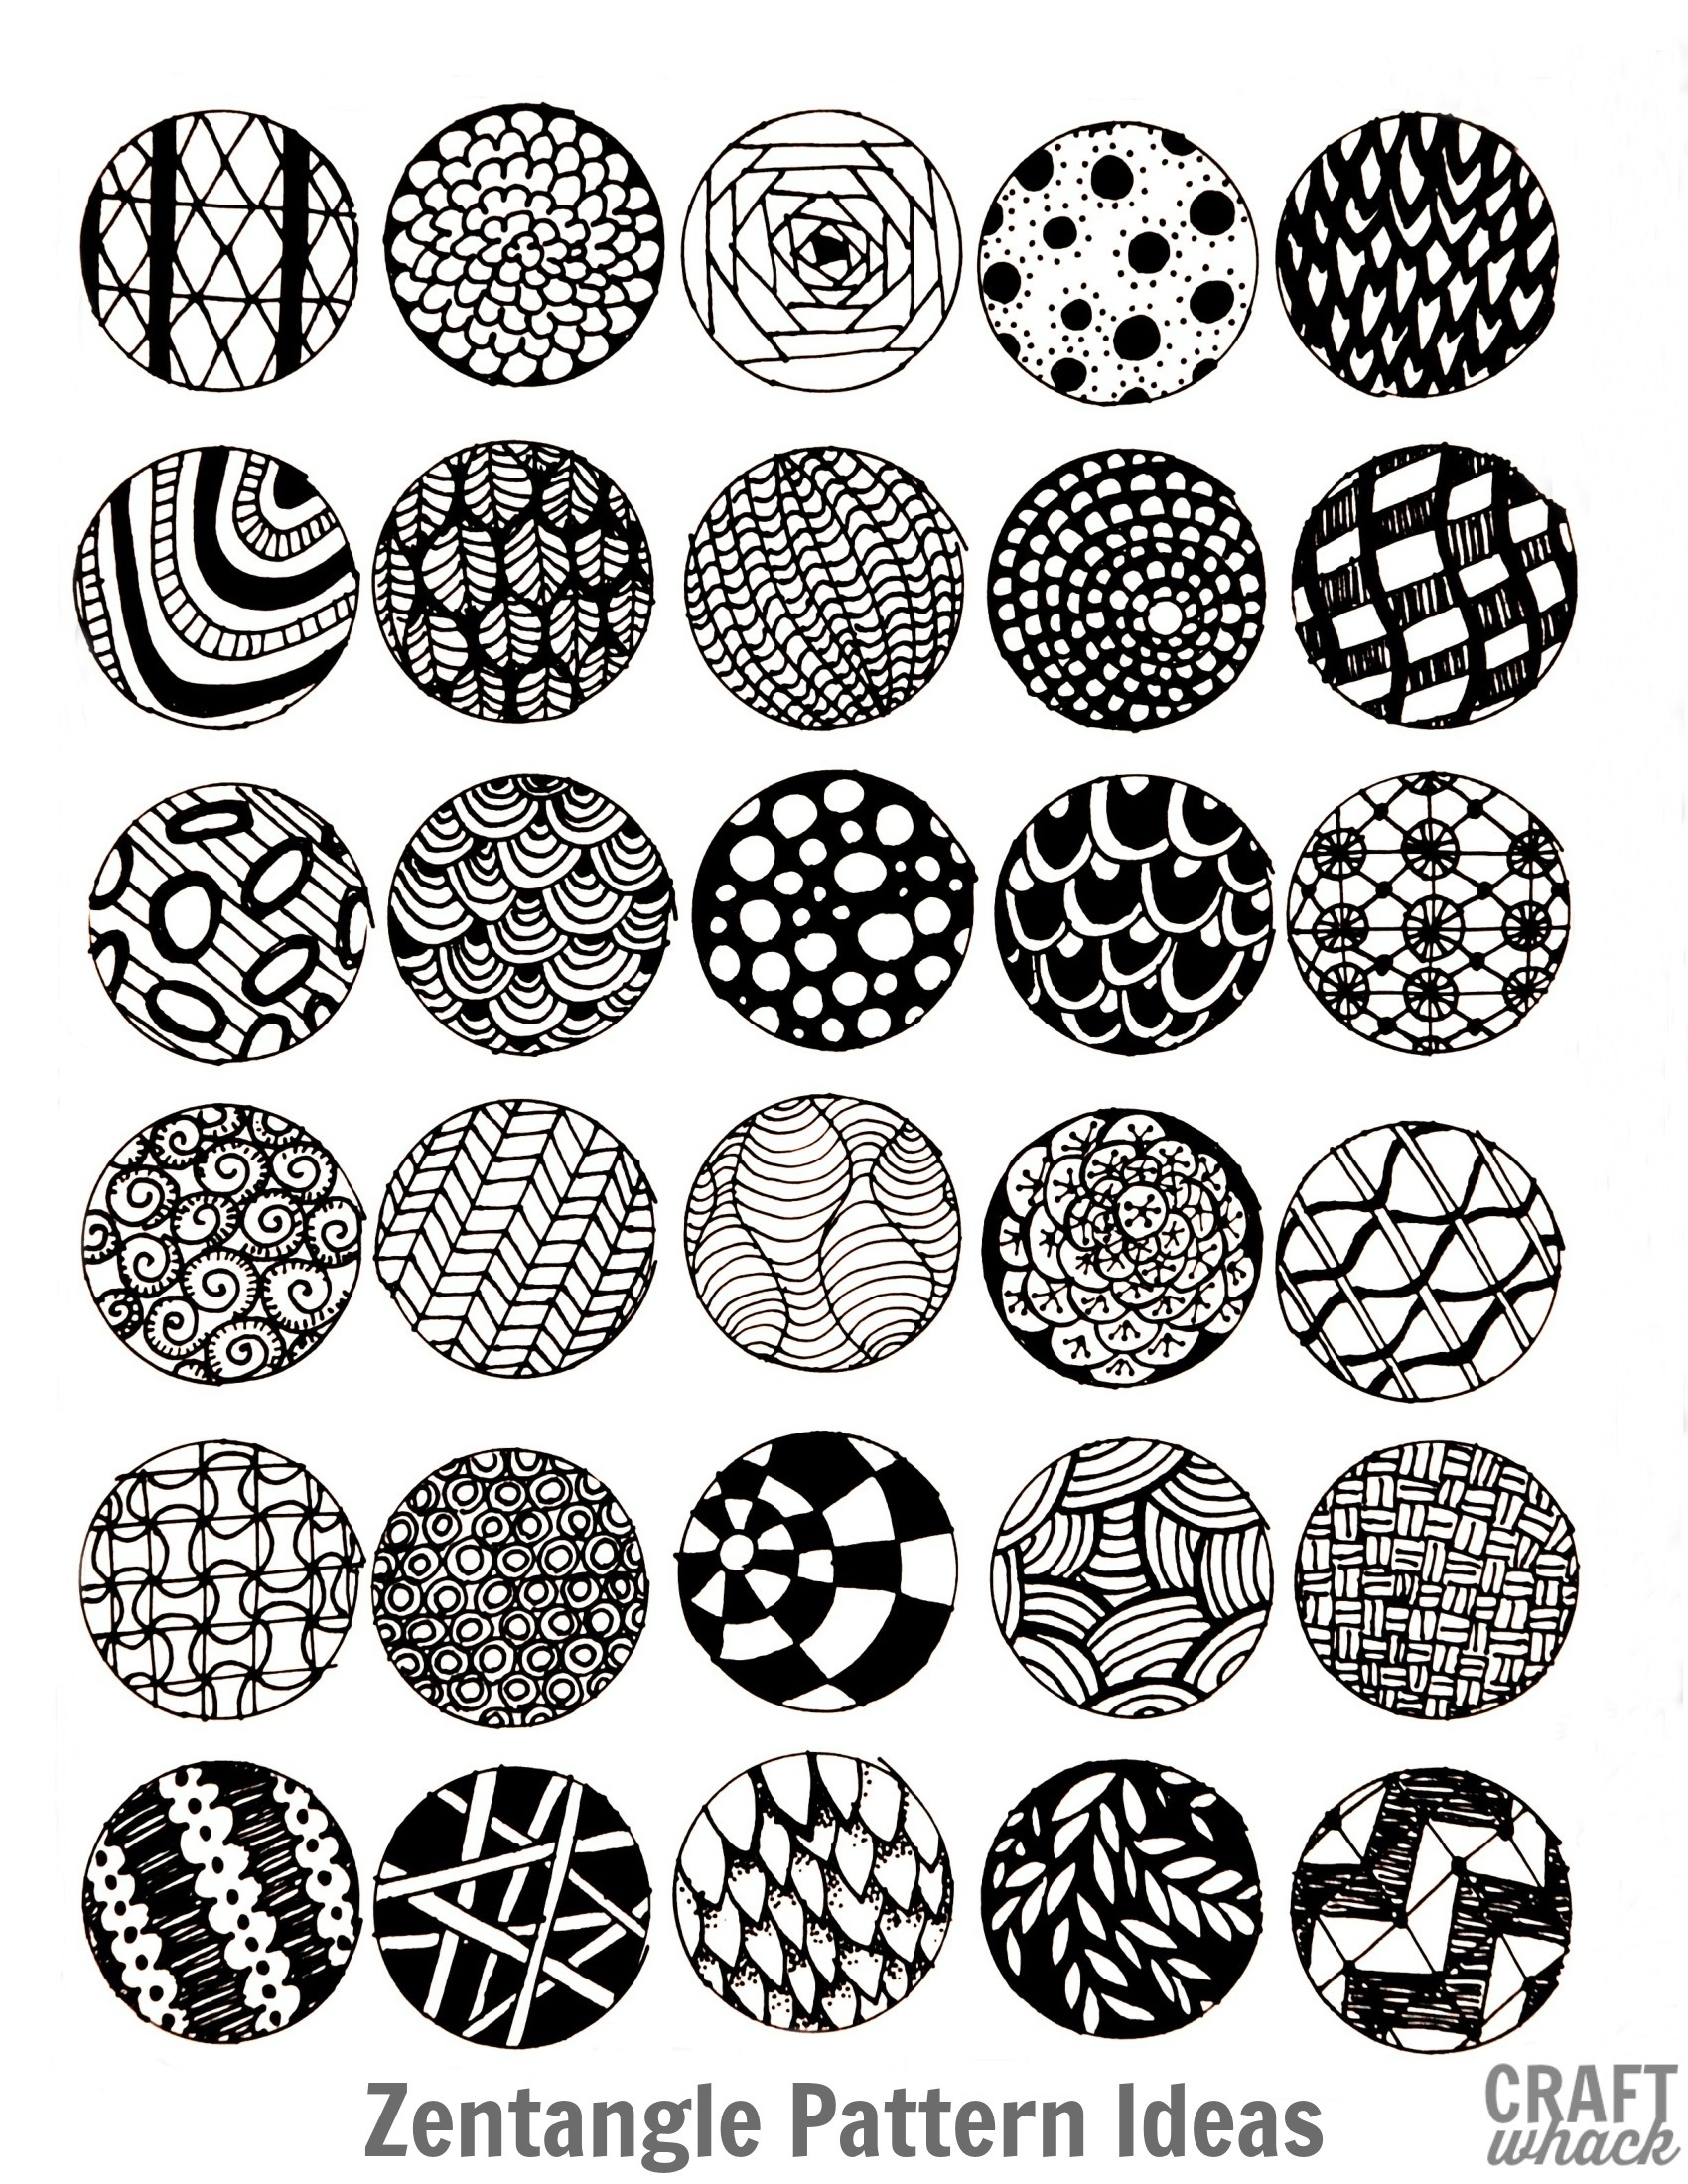 Inspiredzentangle Patterns And Starter Pages · Craftwhack Free